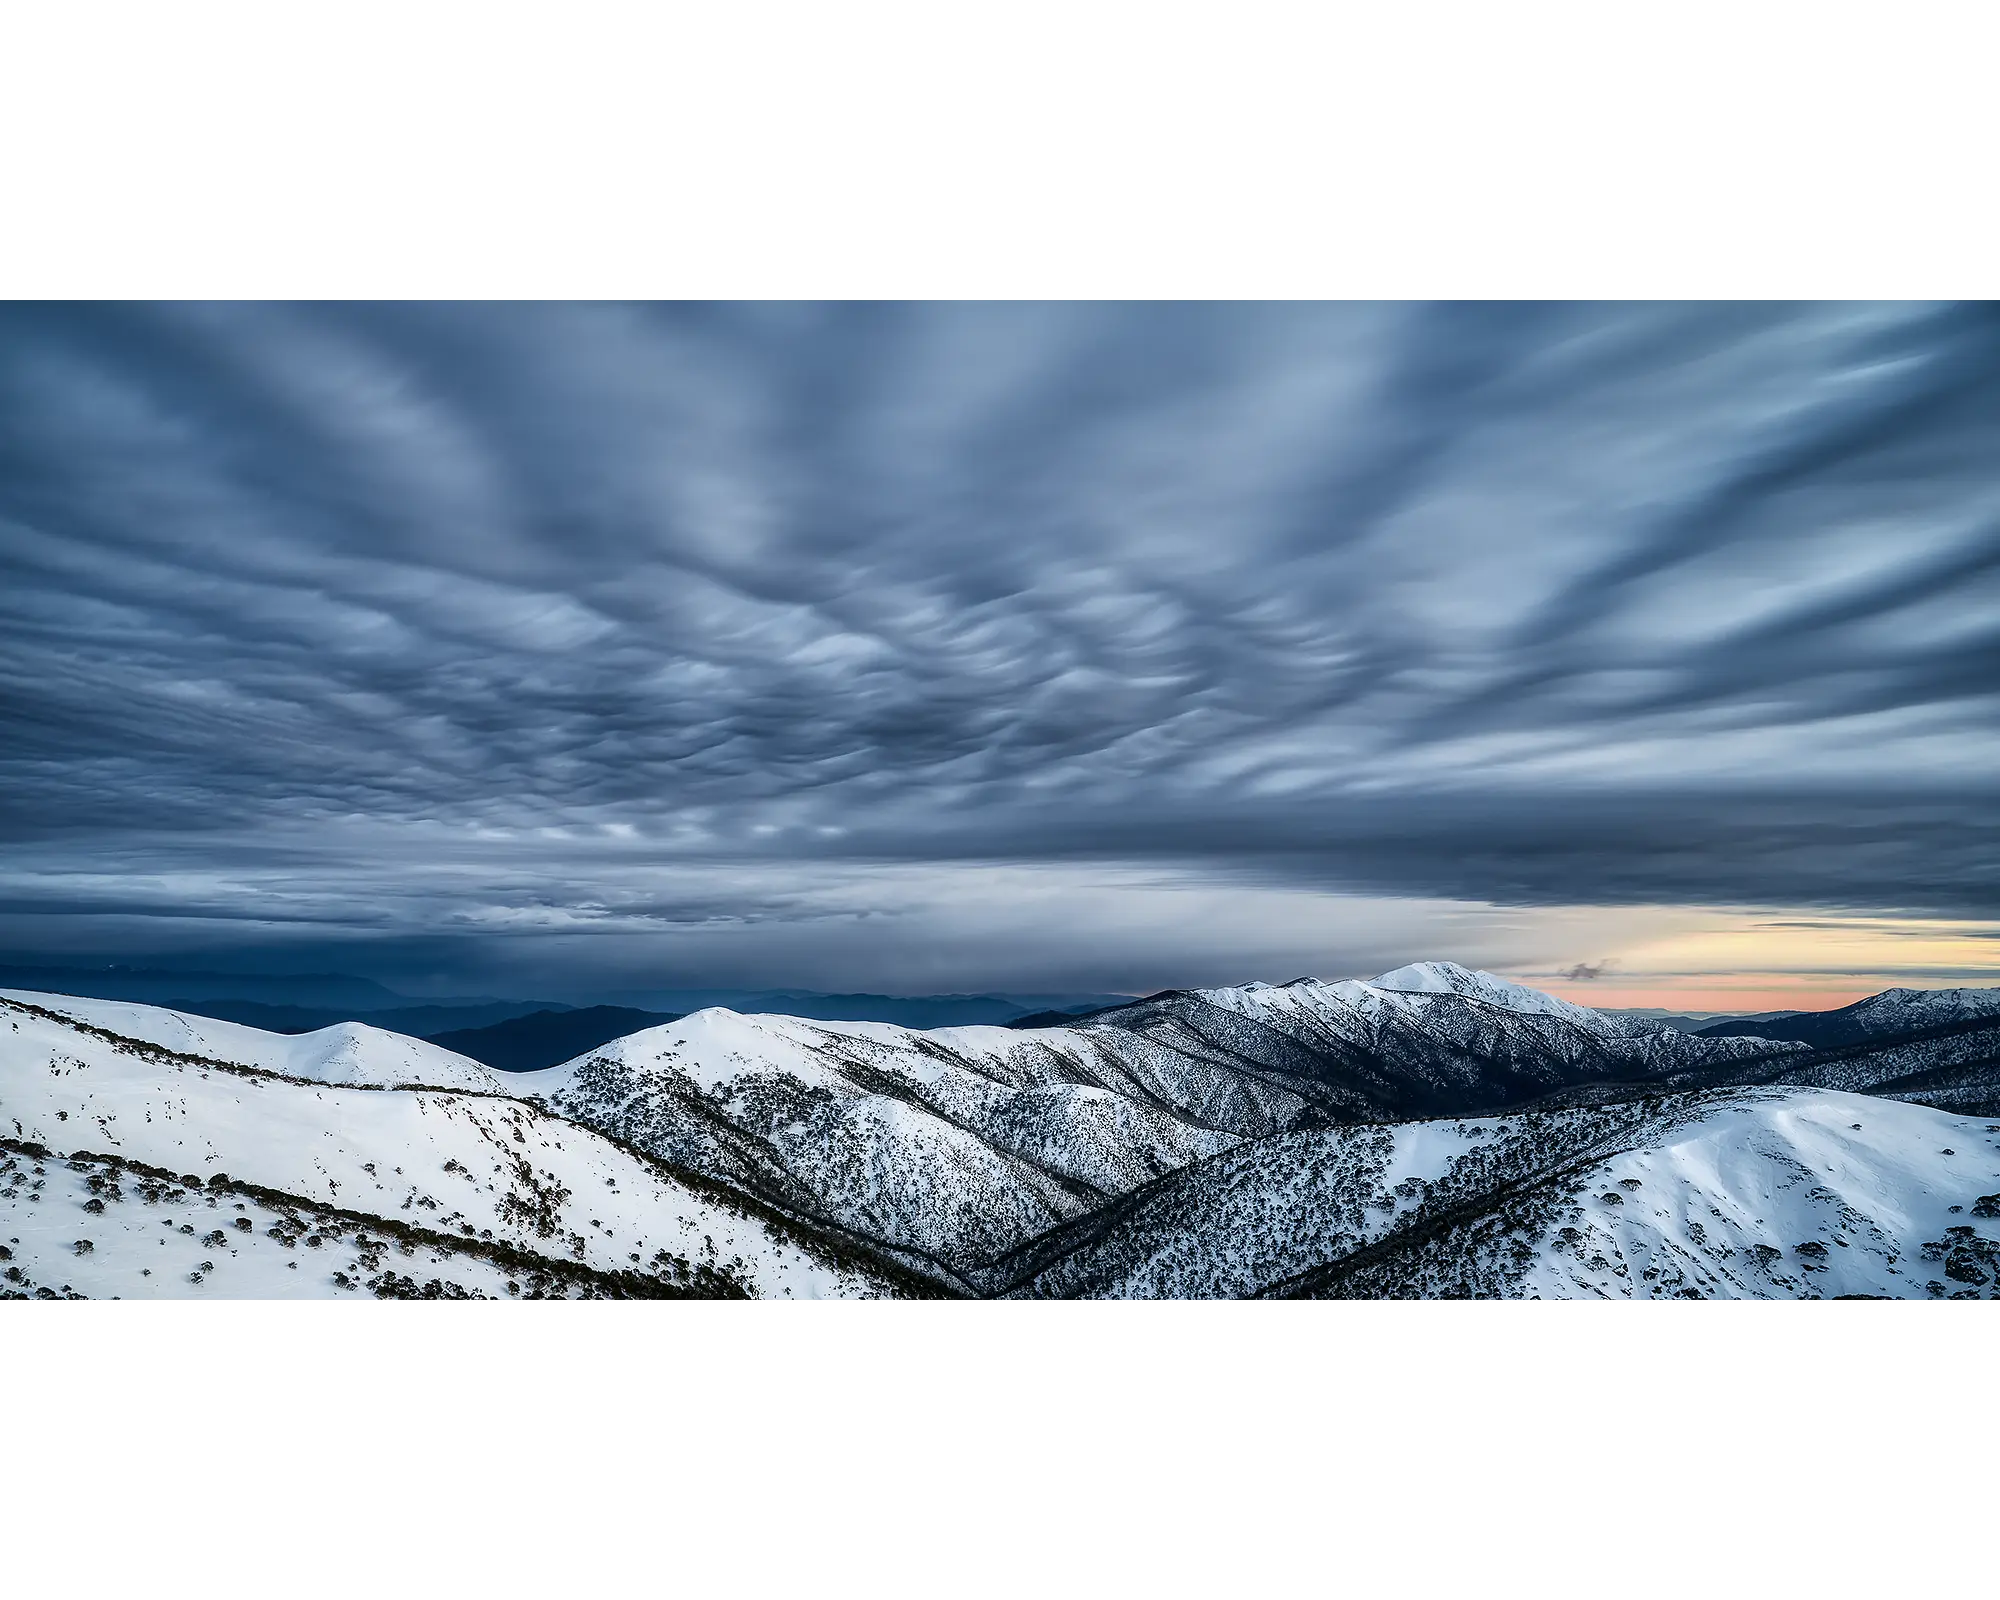 Before The Storm - Clouds over the Razorback and Mount Feathertop summit in winter.